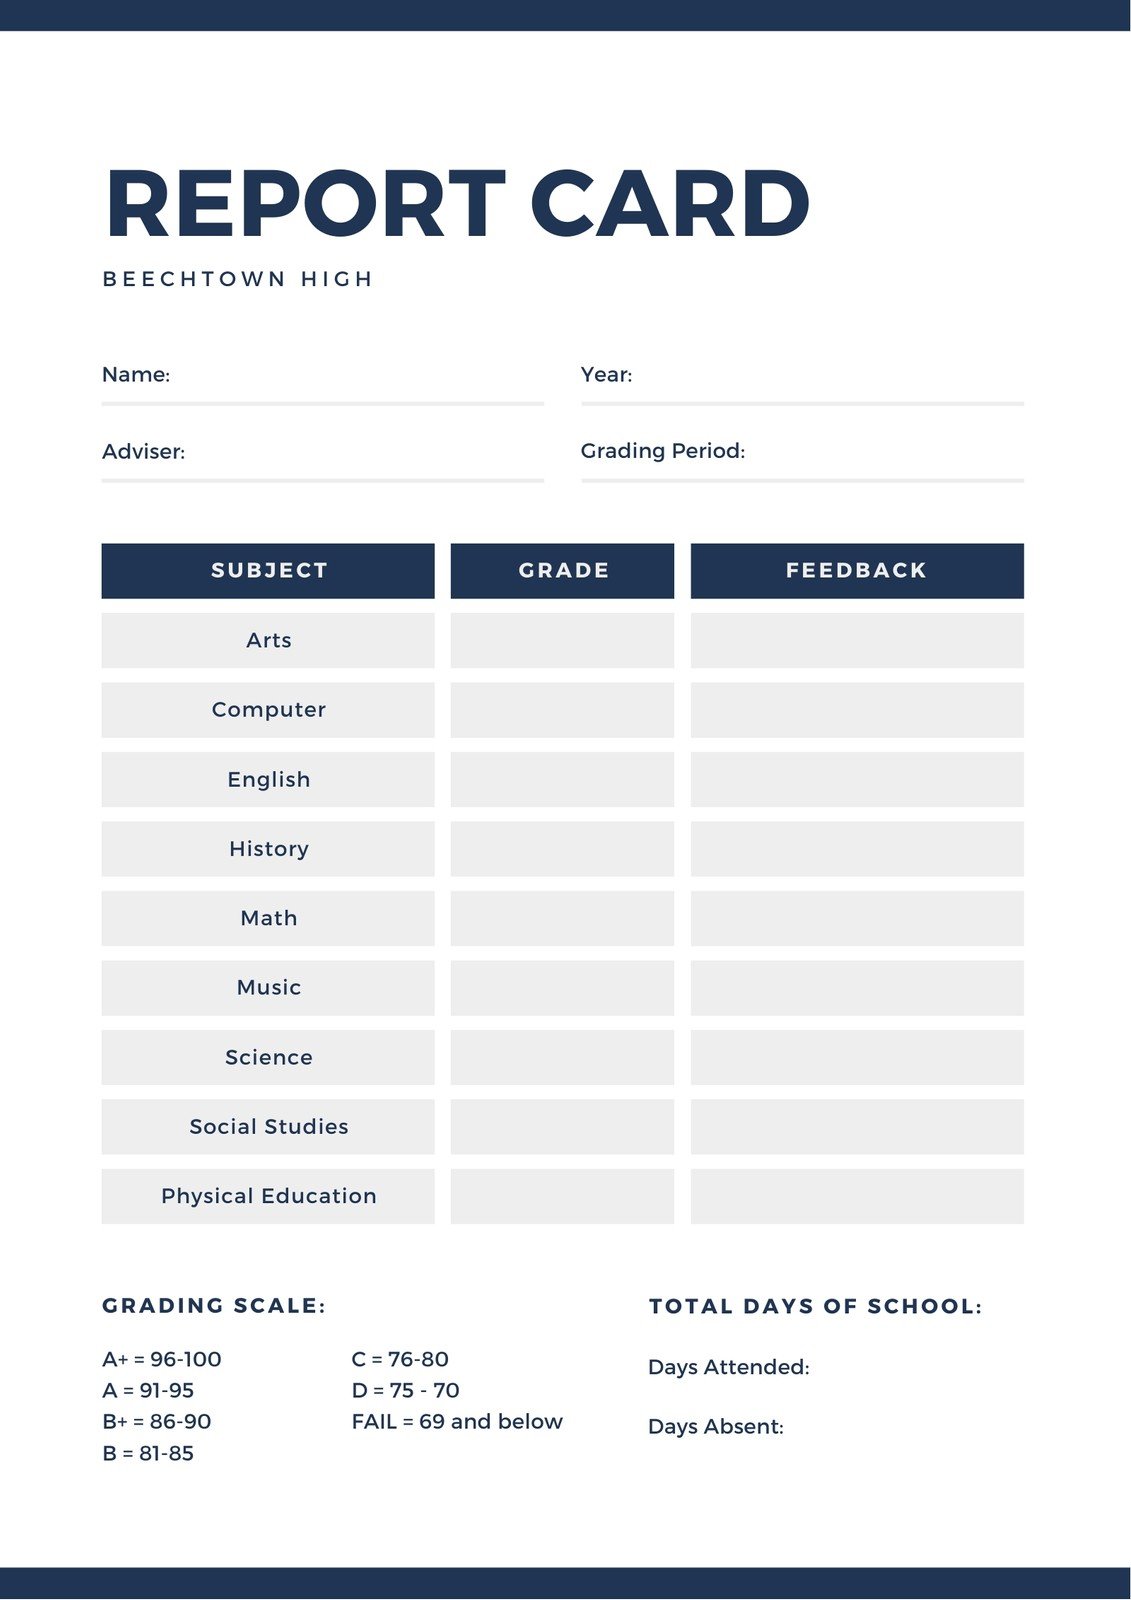 Free, printable, customizable report card templates  Canva With Report Card Format Template